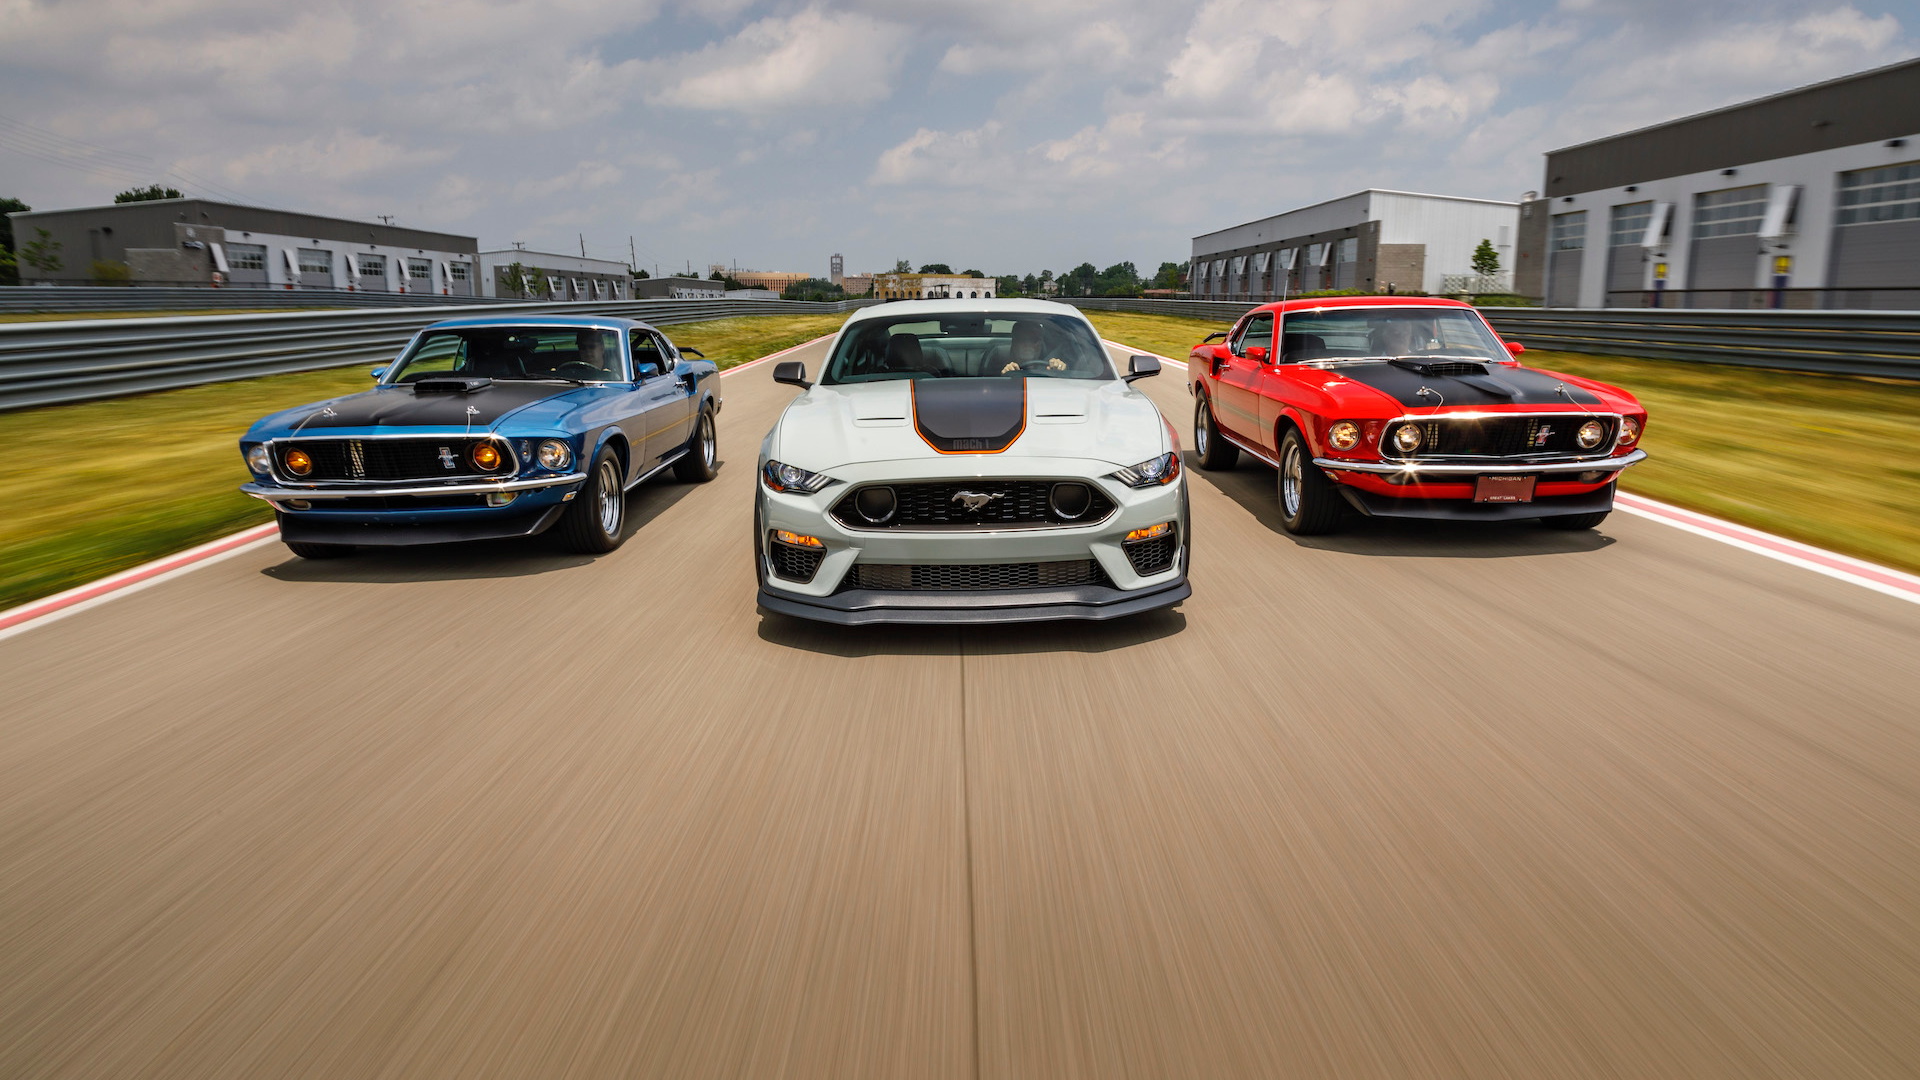 2021 Ford Mustang Mach 1 and 1969 Mustang Mach 1